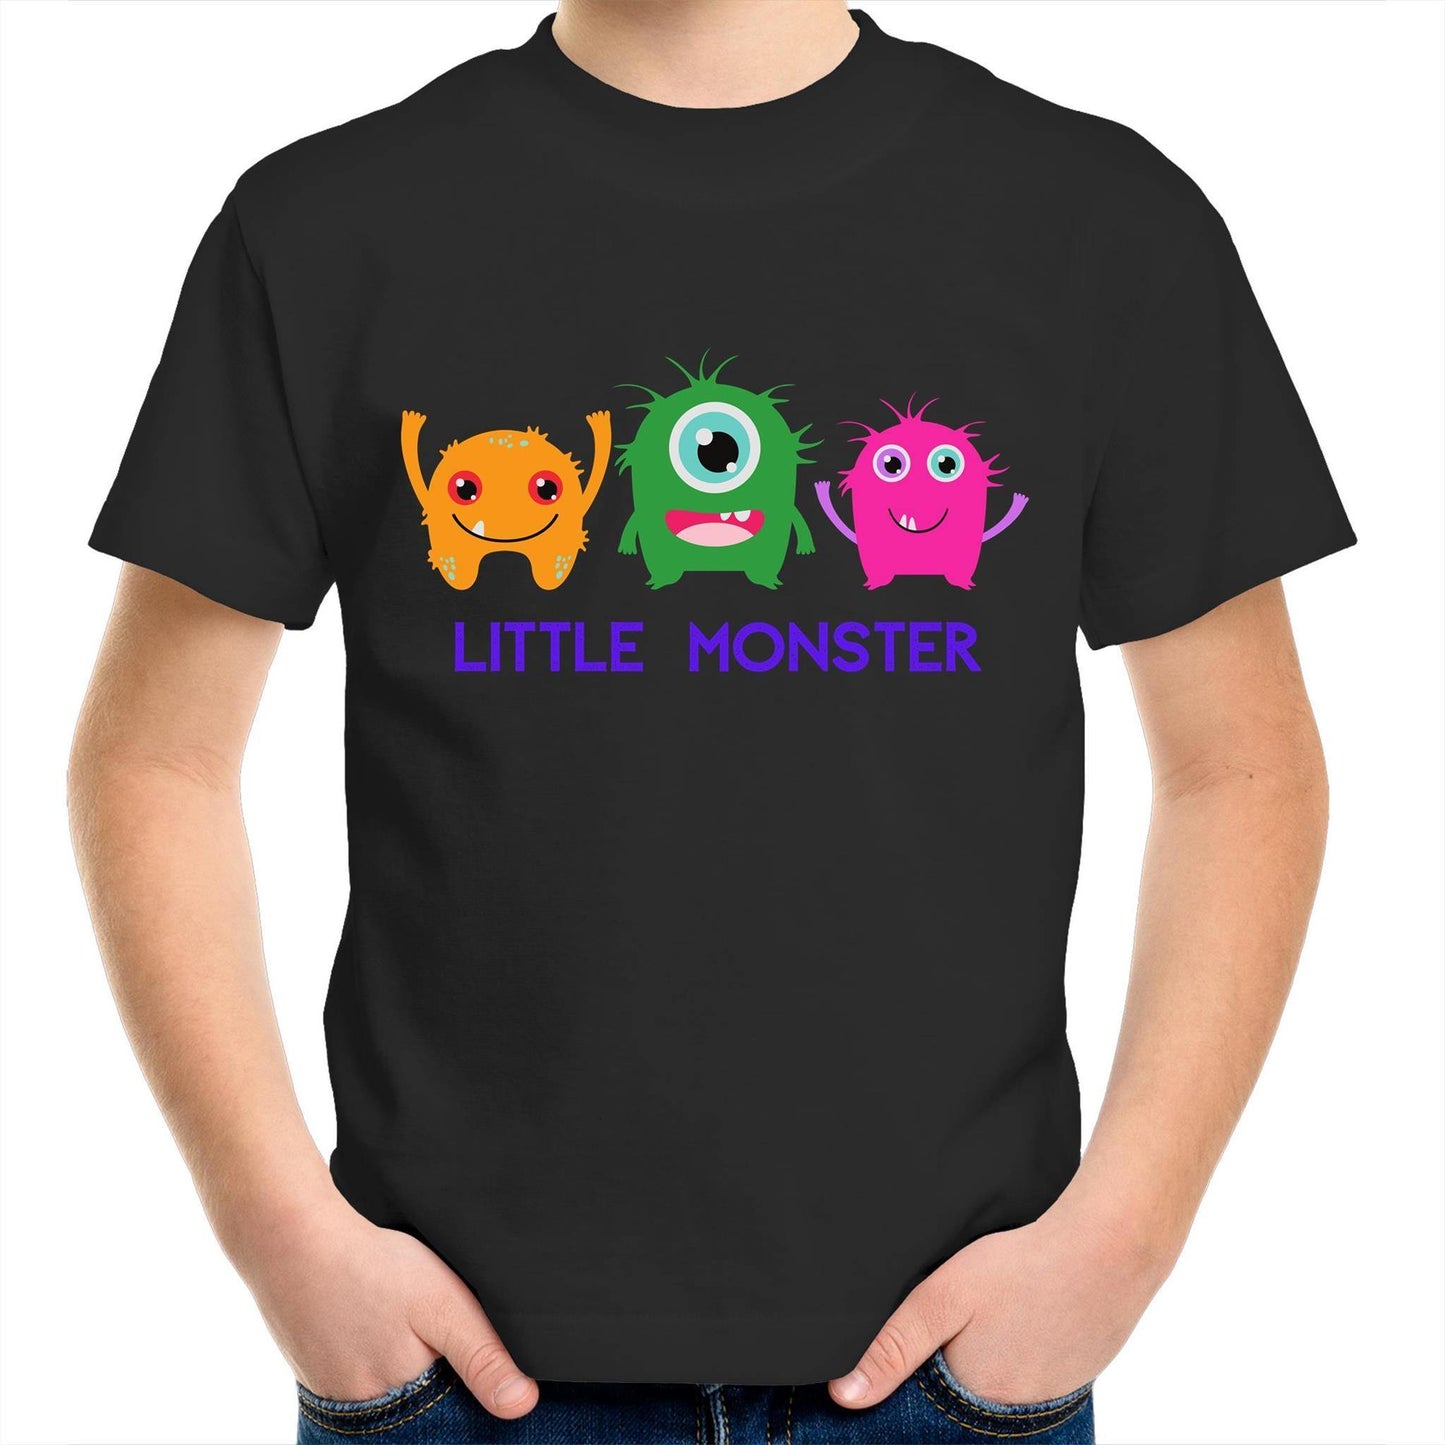 Little Monster - Kids Youth Crew T-Shirt Black Kids Youth T-shirt Funny Sci Fi